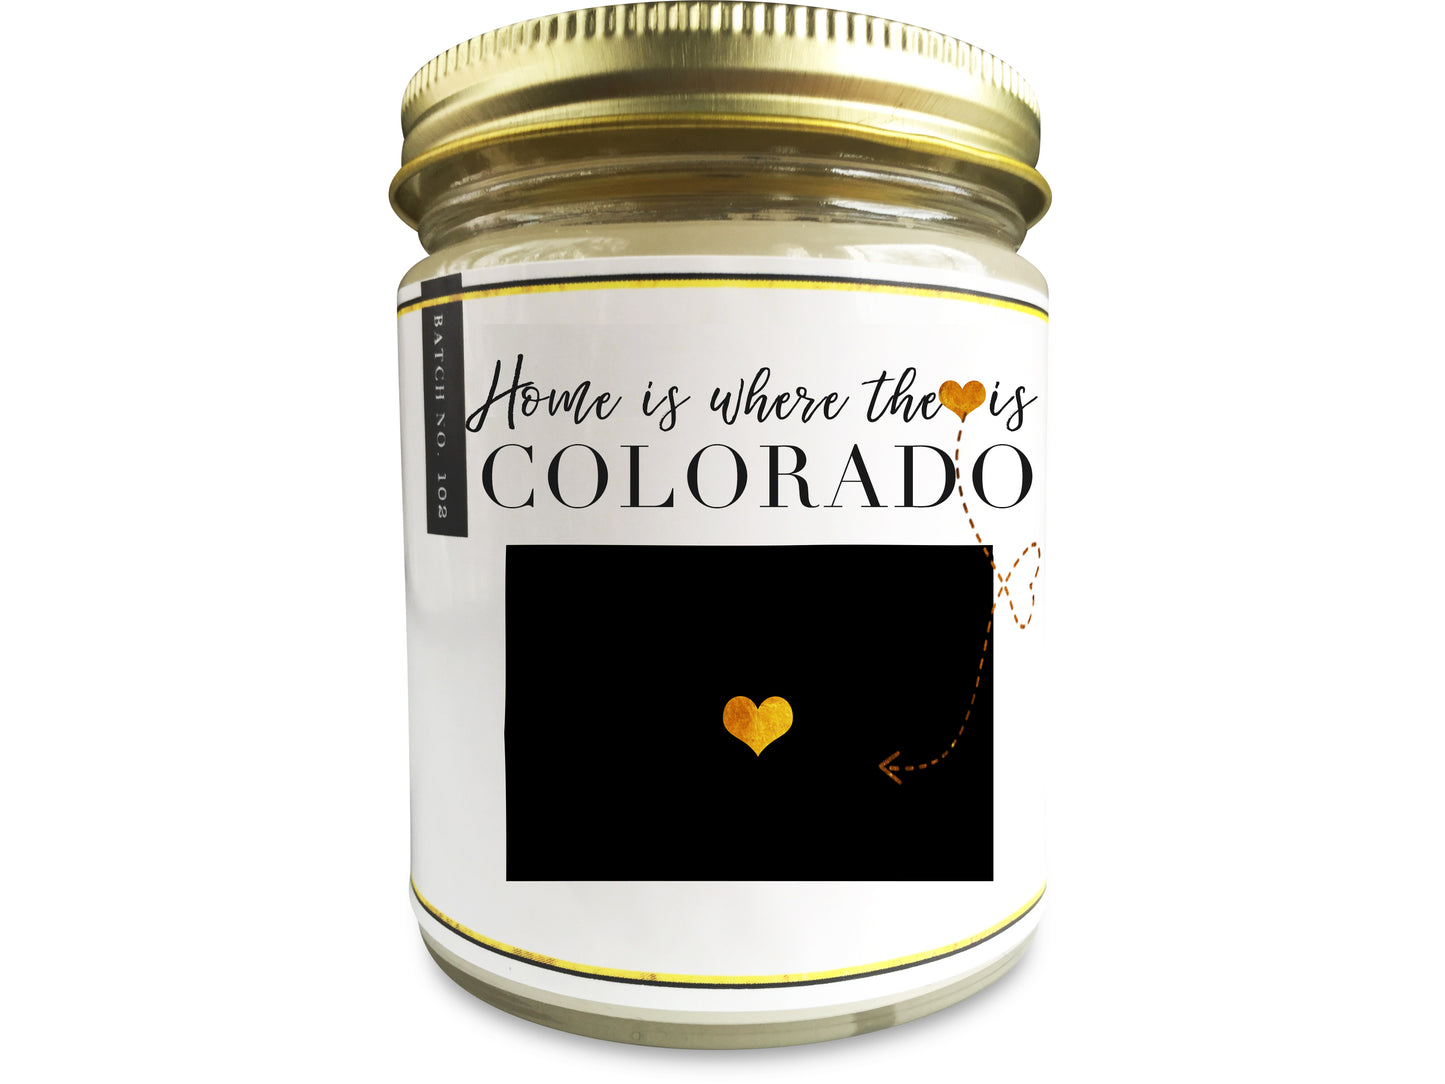 Colorado State Scented Candle - Personalized Gift - Personalize Candle Greetings